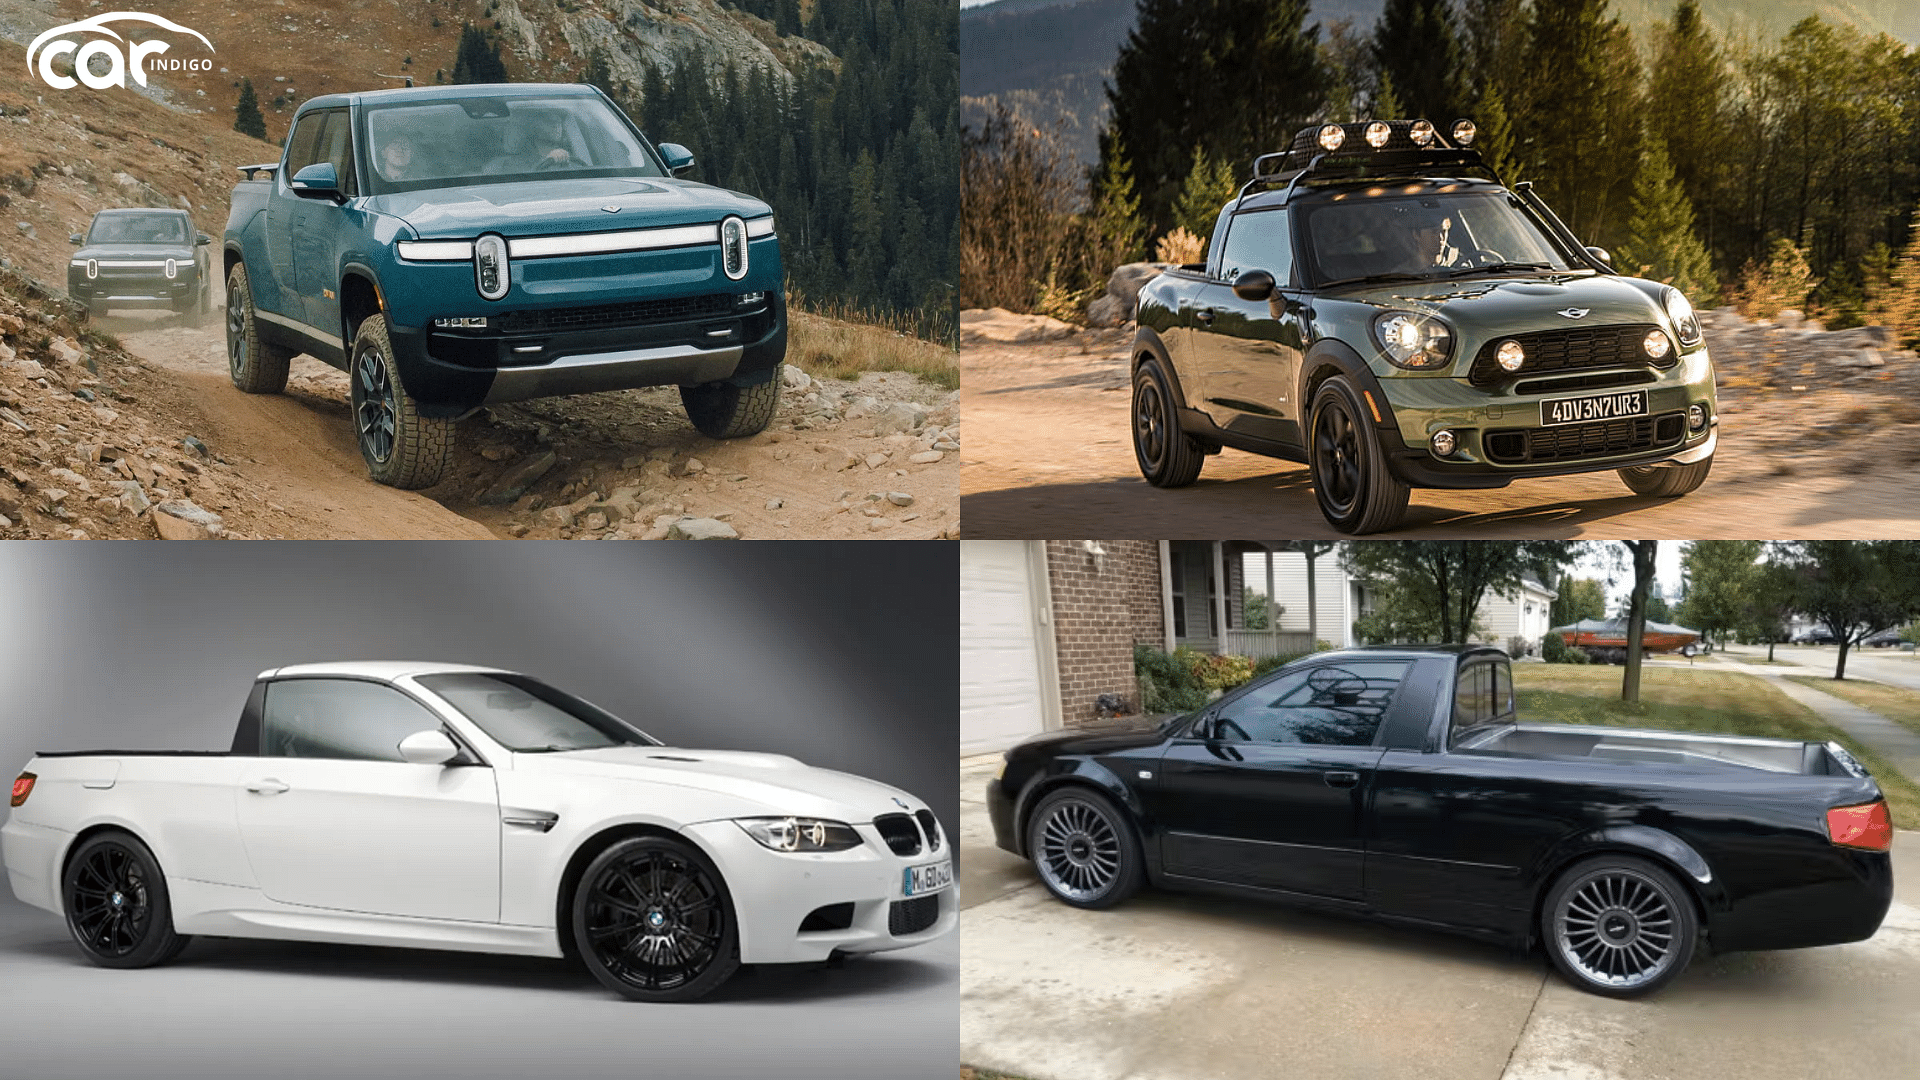 Top 10 Unique Utes and Trucks Outshining Muscle Cars's image